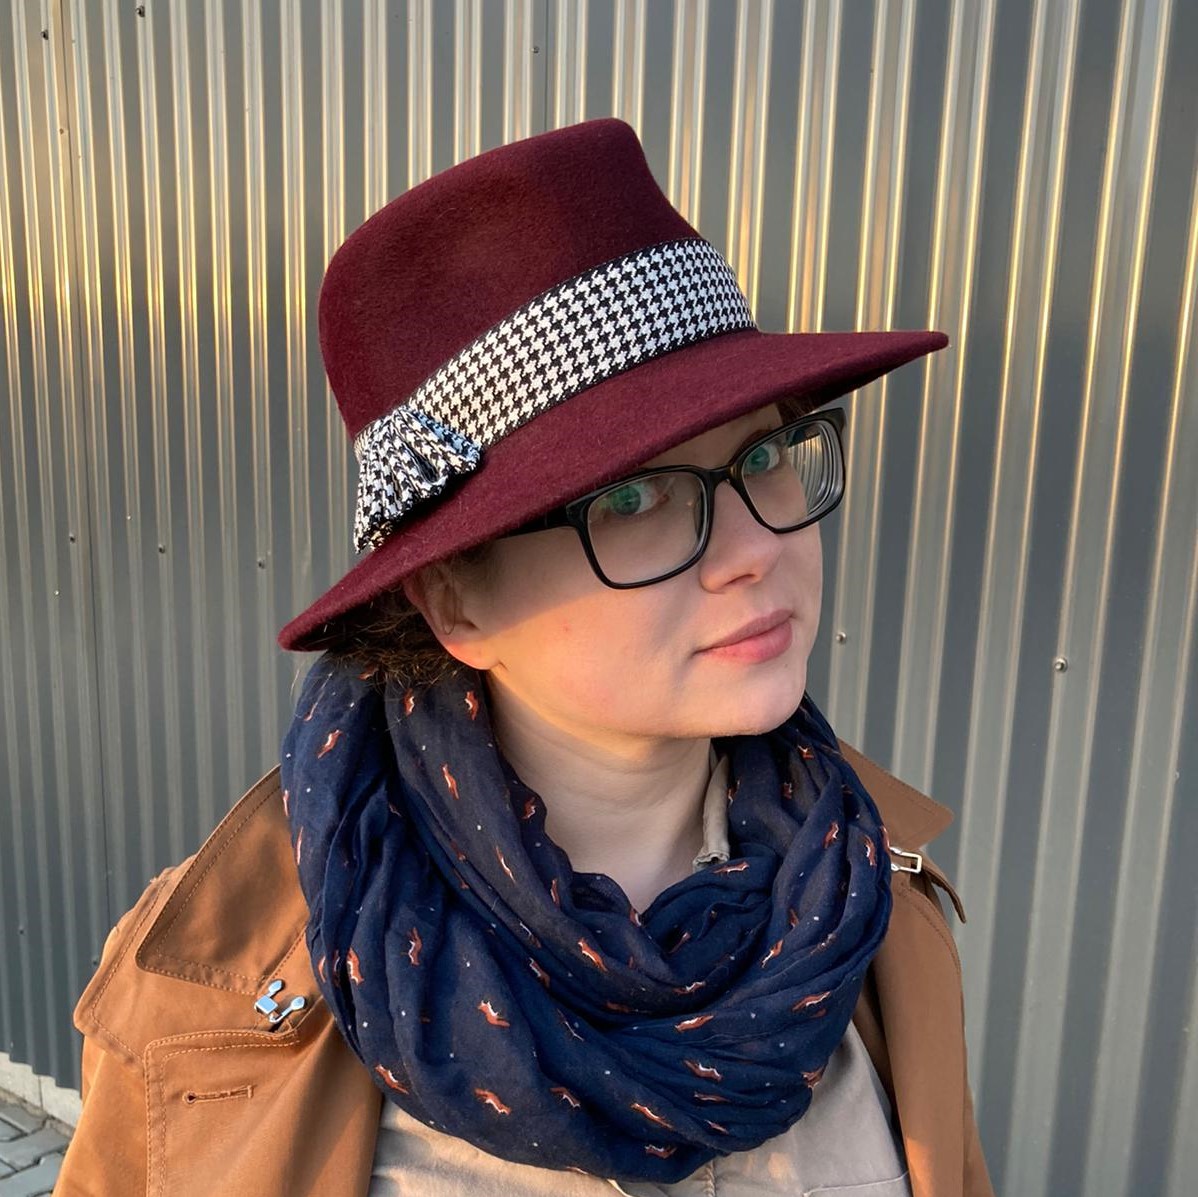 A woman wearing a bespoke burgundy hat with a black & white houndstooth ribbon. Add a trench and voila a perfect casual look.